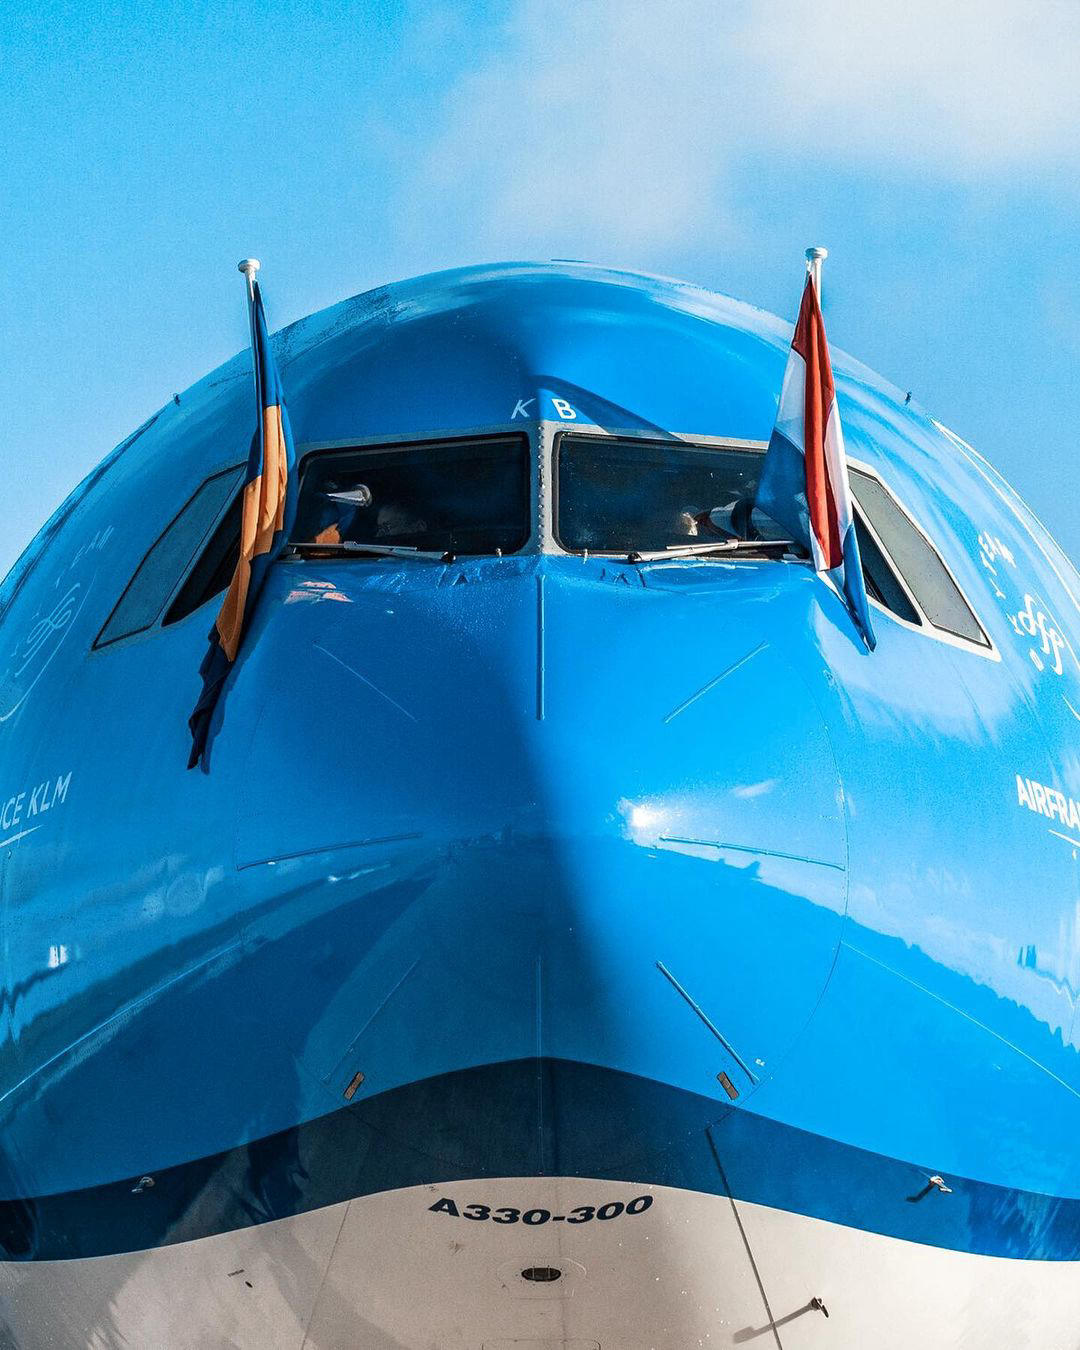 image  1 KLM Royal Dutch Airlines - One more quiz before the year is over